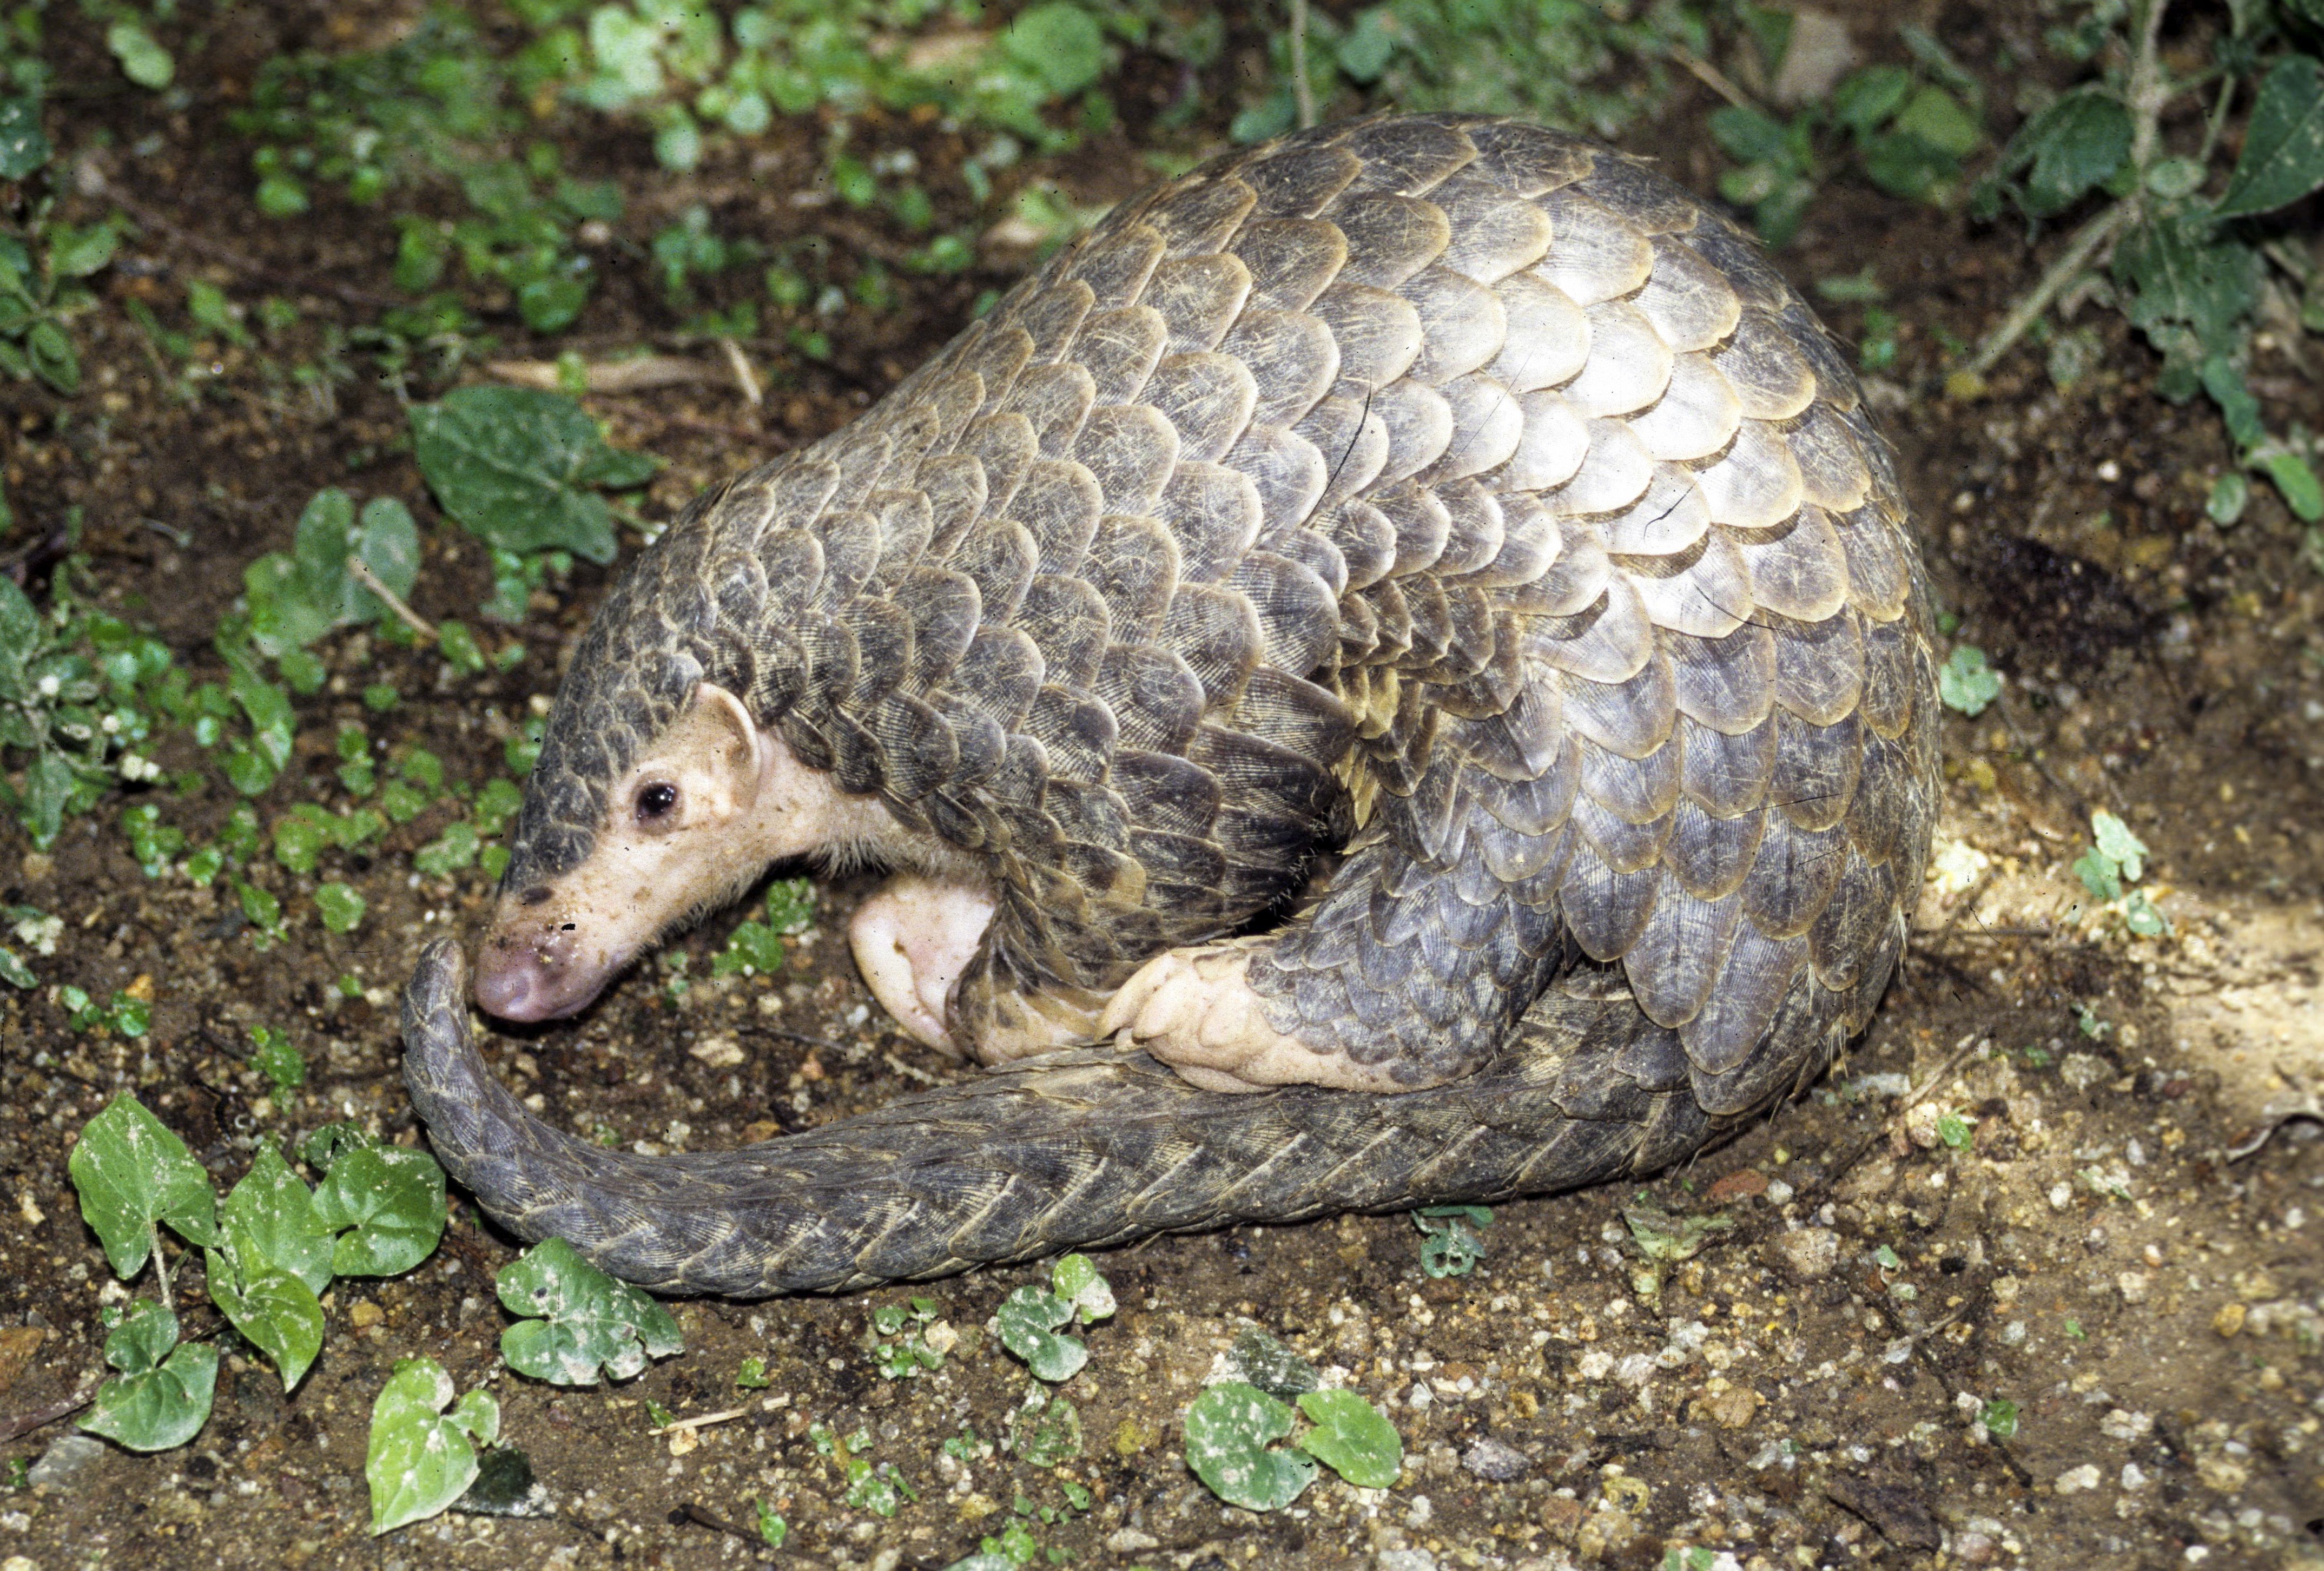 Pangolins are critically endangered largely due to demand for their meat and scales. Photo: Dr Gary Ades, KFBG